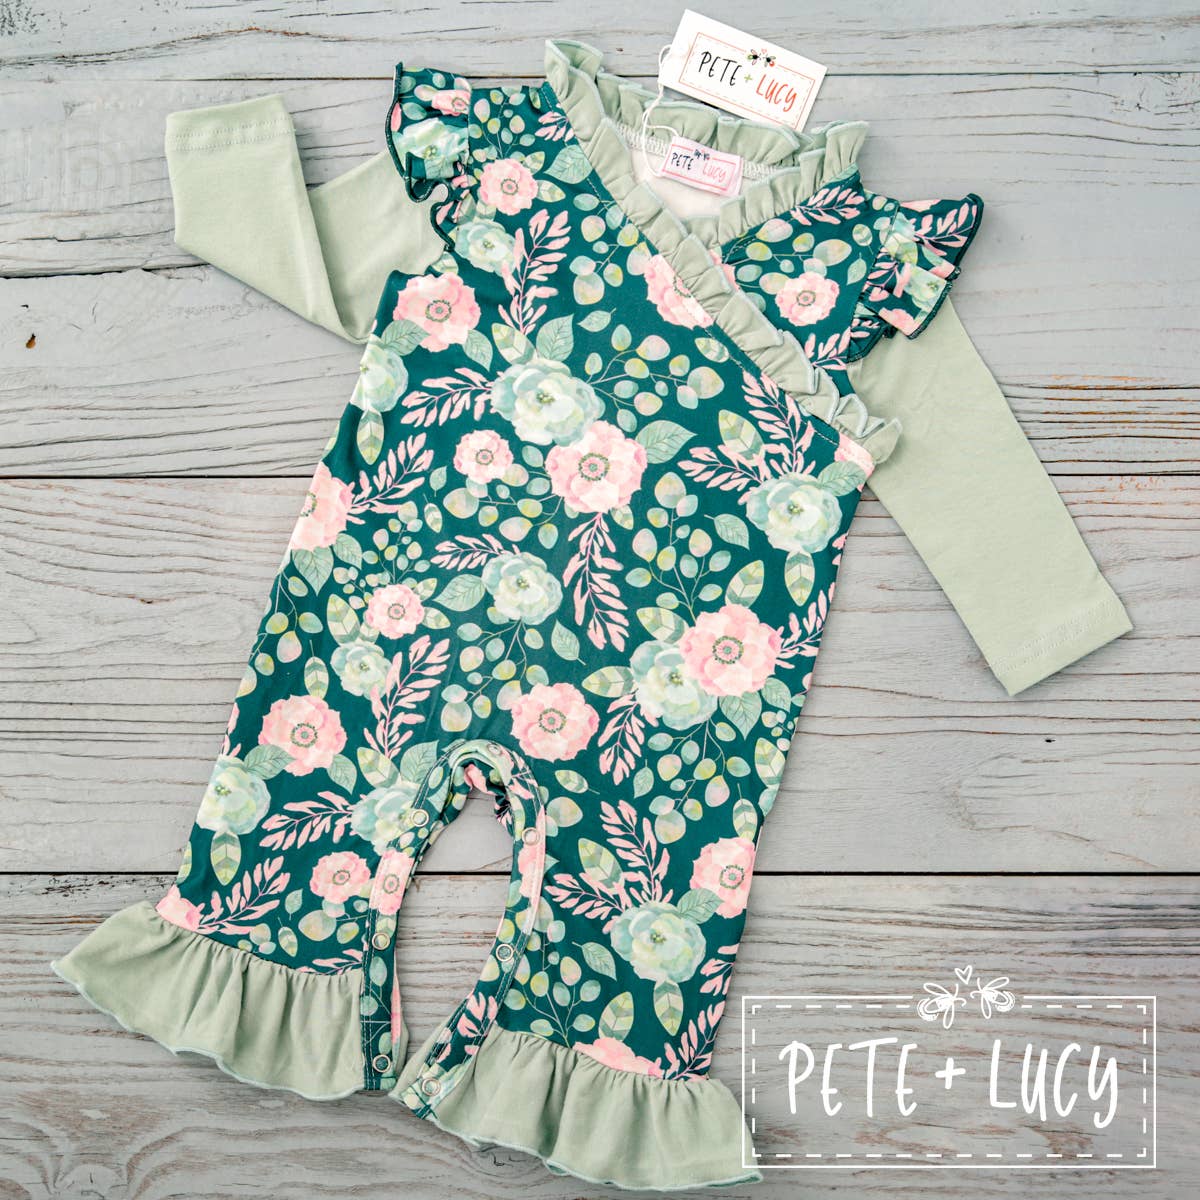 PETE + LUCY Sweet Emerald Green Ruffle Long Sleeve Romper Baby Toddler